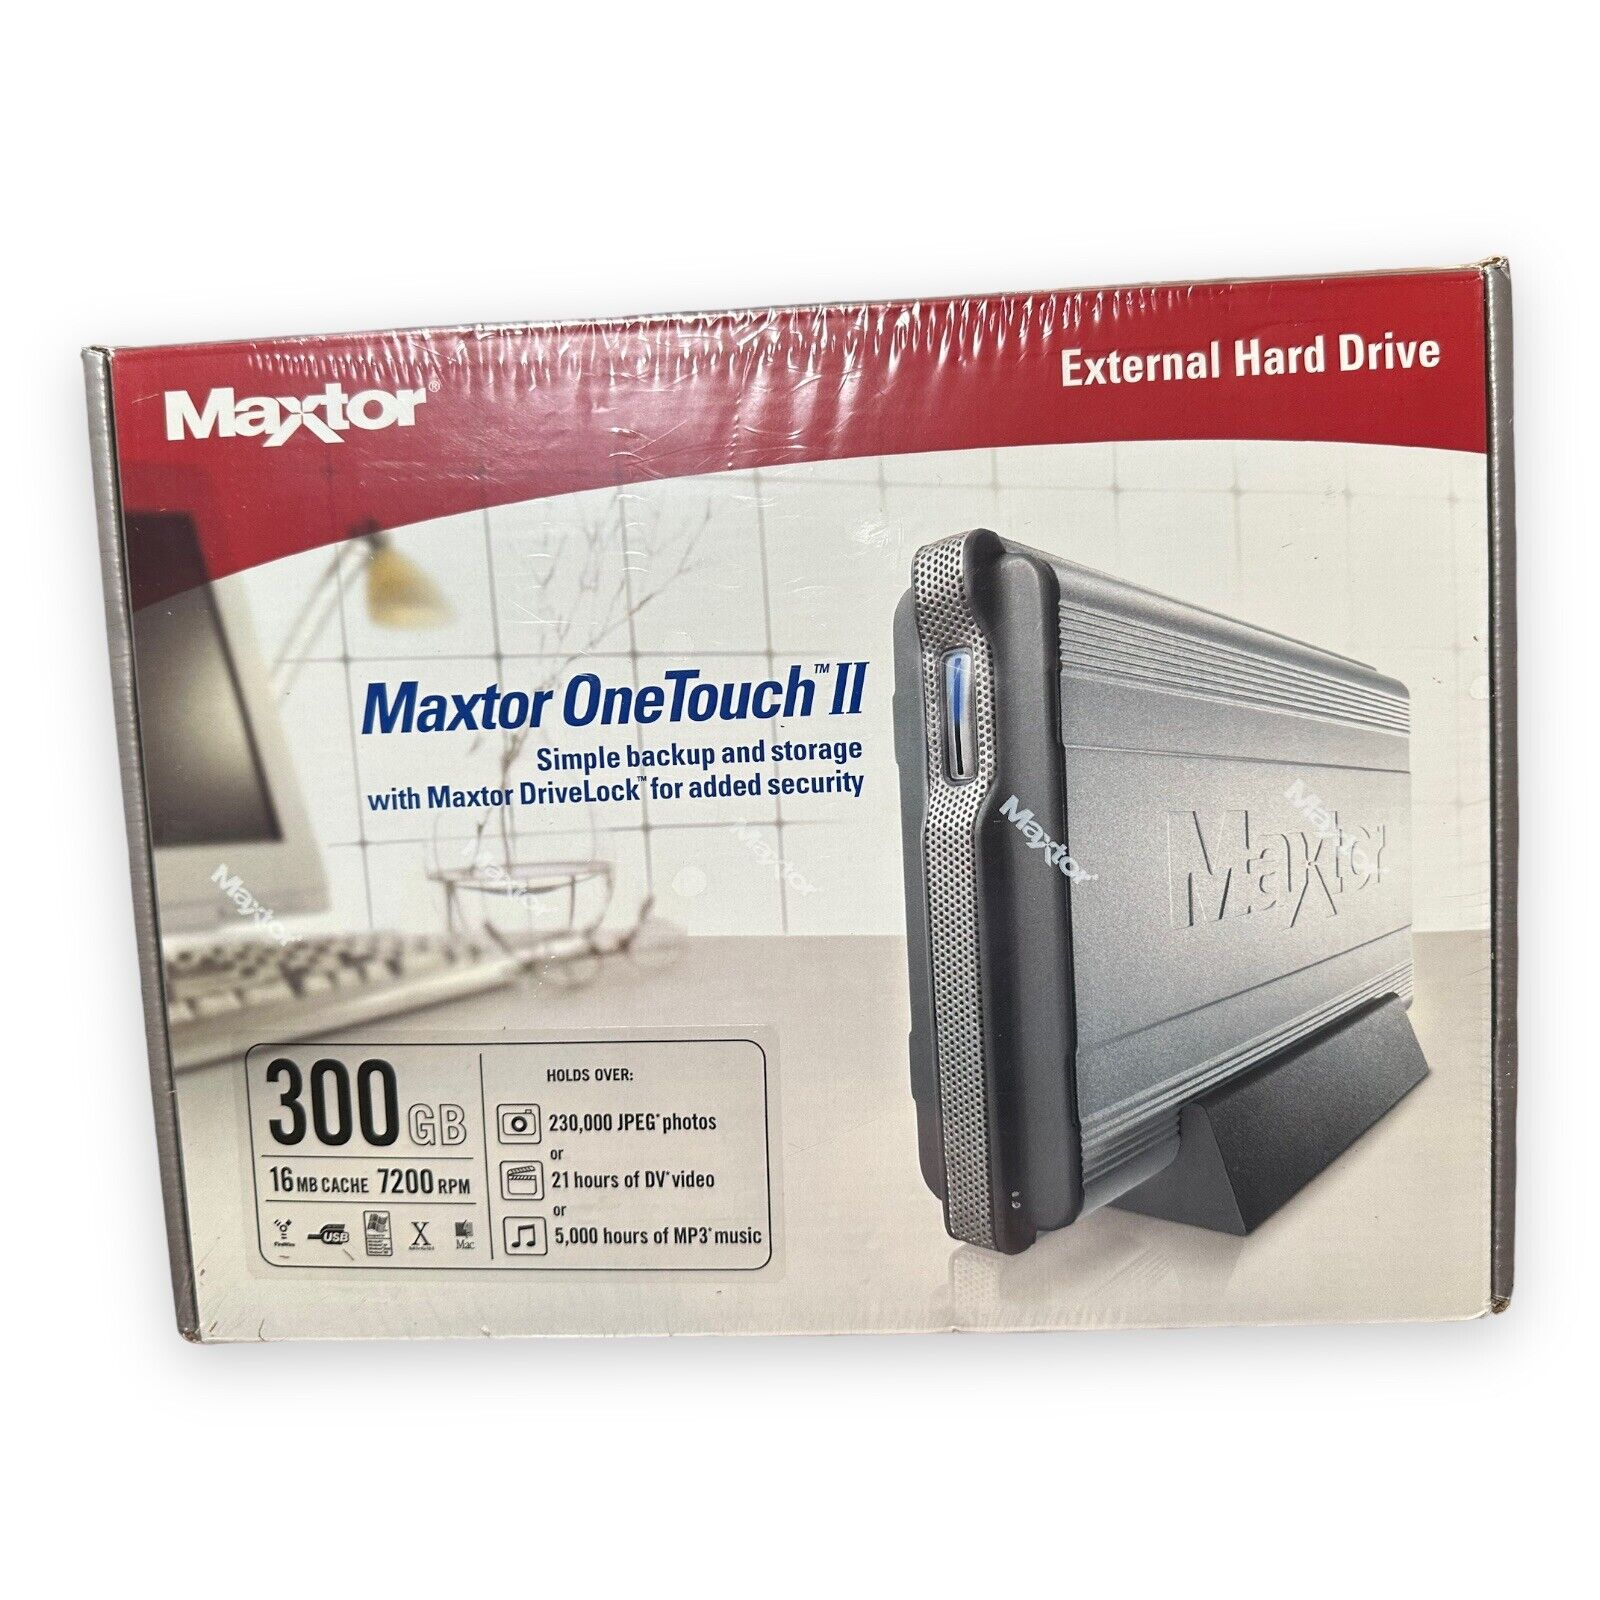 MAXTOR ONETOUCH II External Hard Drive 300 GB 7200 RPM Brand New Factory Sealed